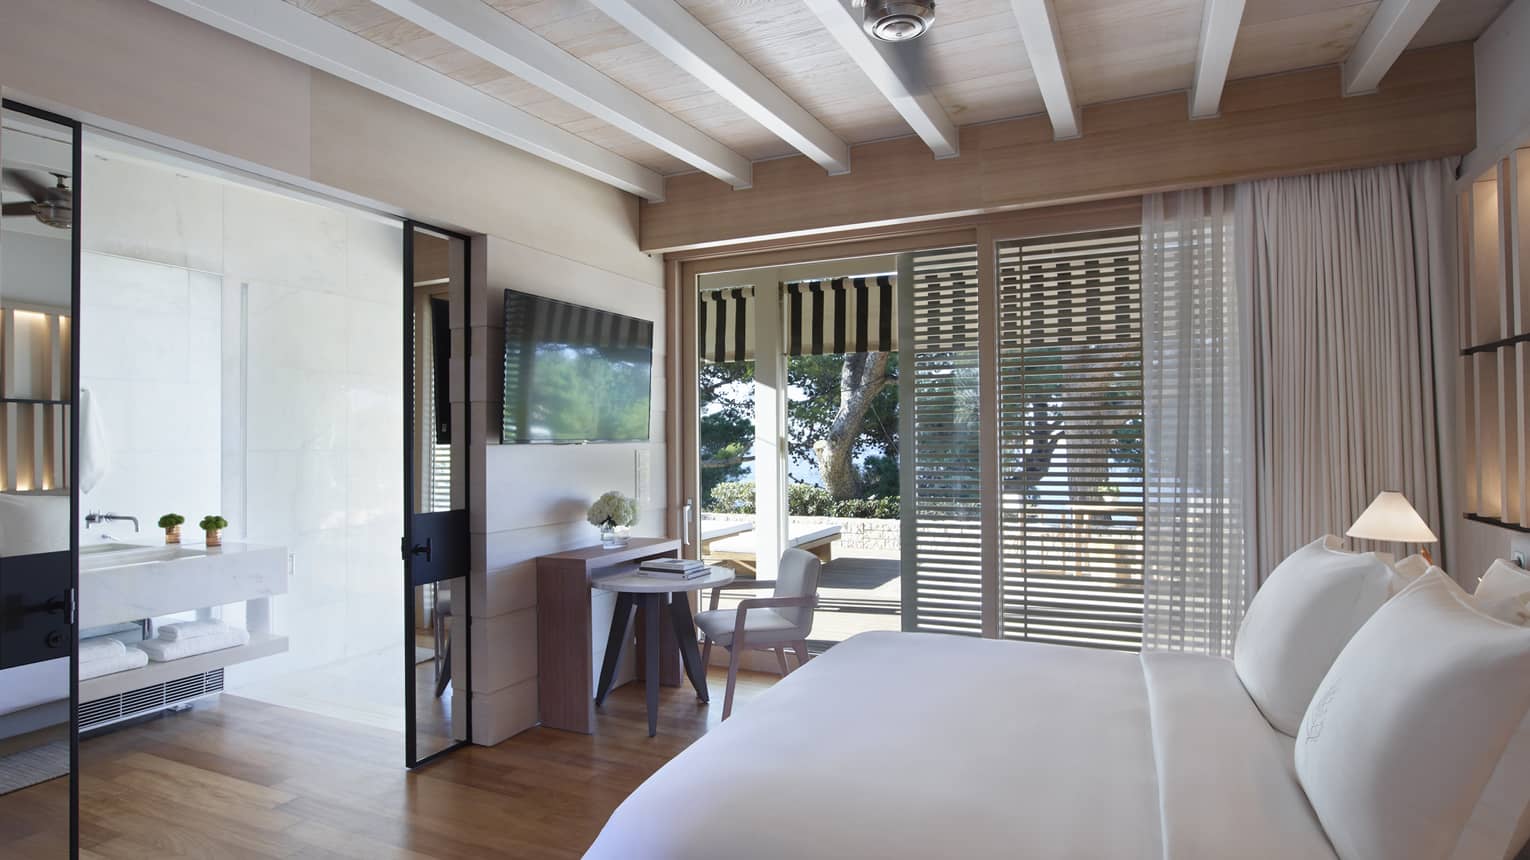 Guest room with white king bed, exposed rafter ceiling, sliding doors opening onto patio, mirrored doors to bathroom